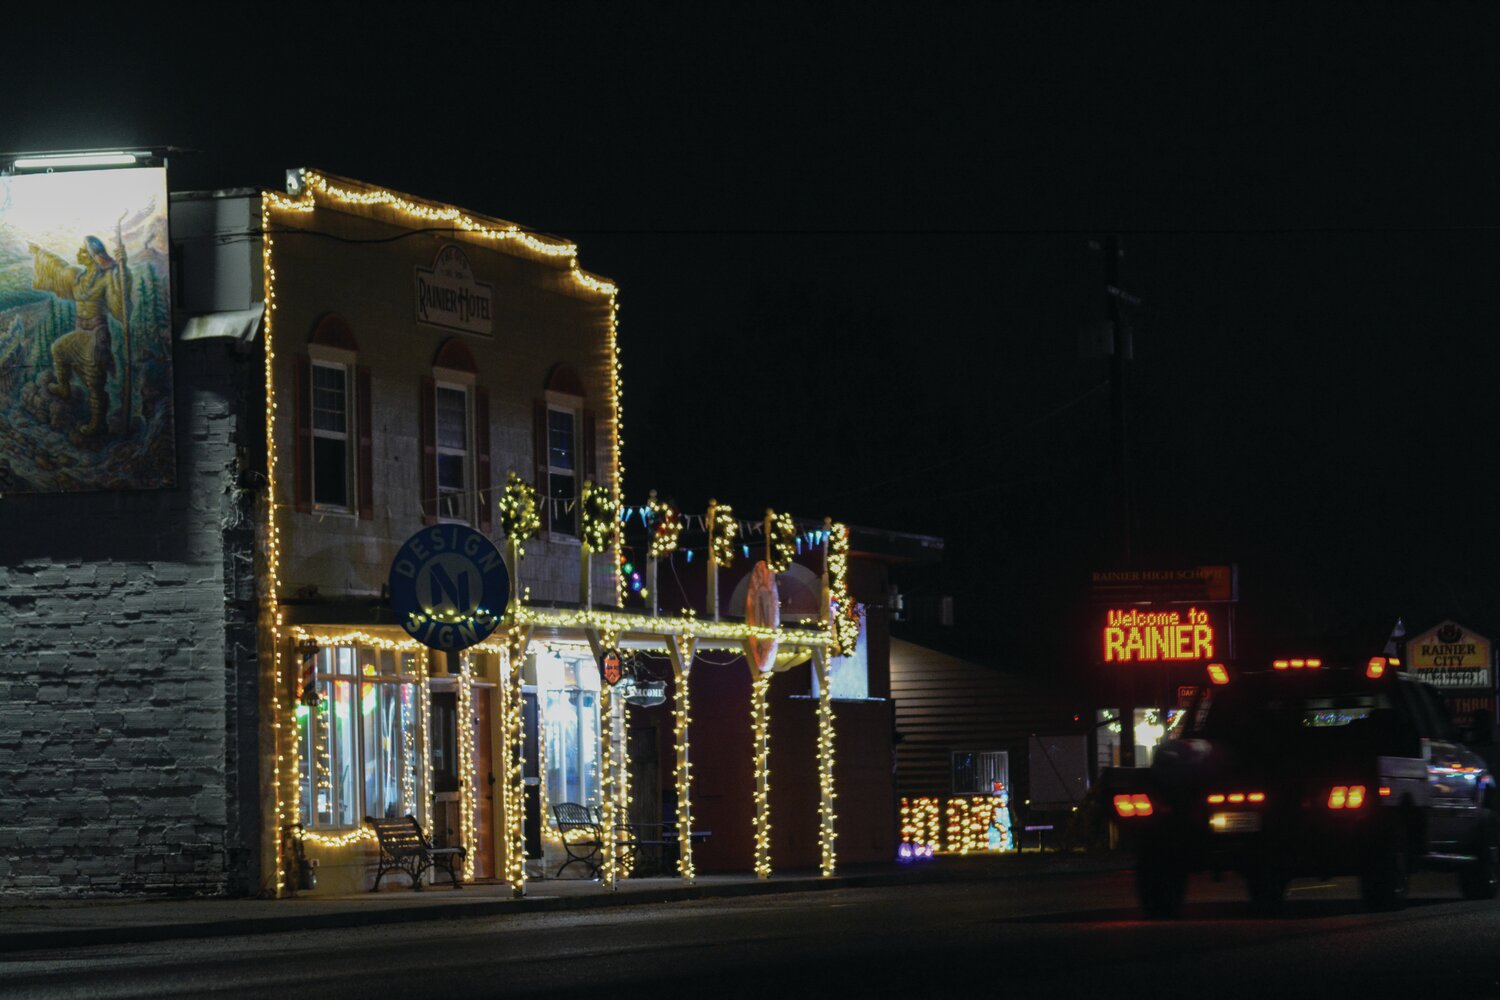 Rainier’s Design N Signs was one of many downtown businesses decorated for the Christmas season.